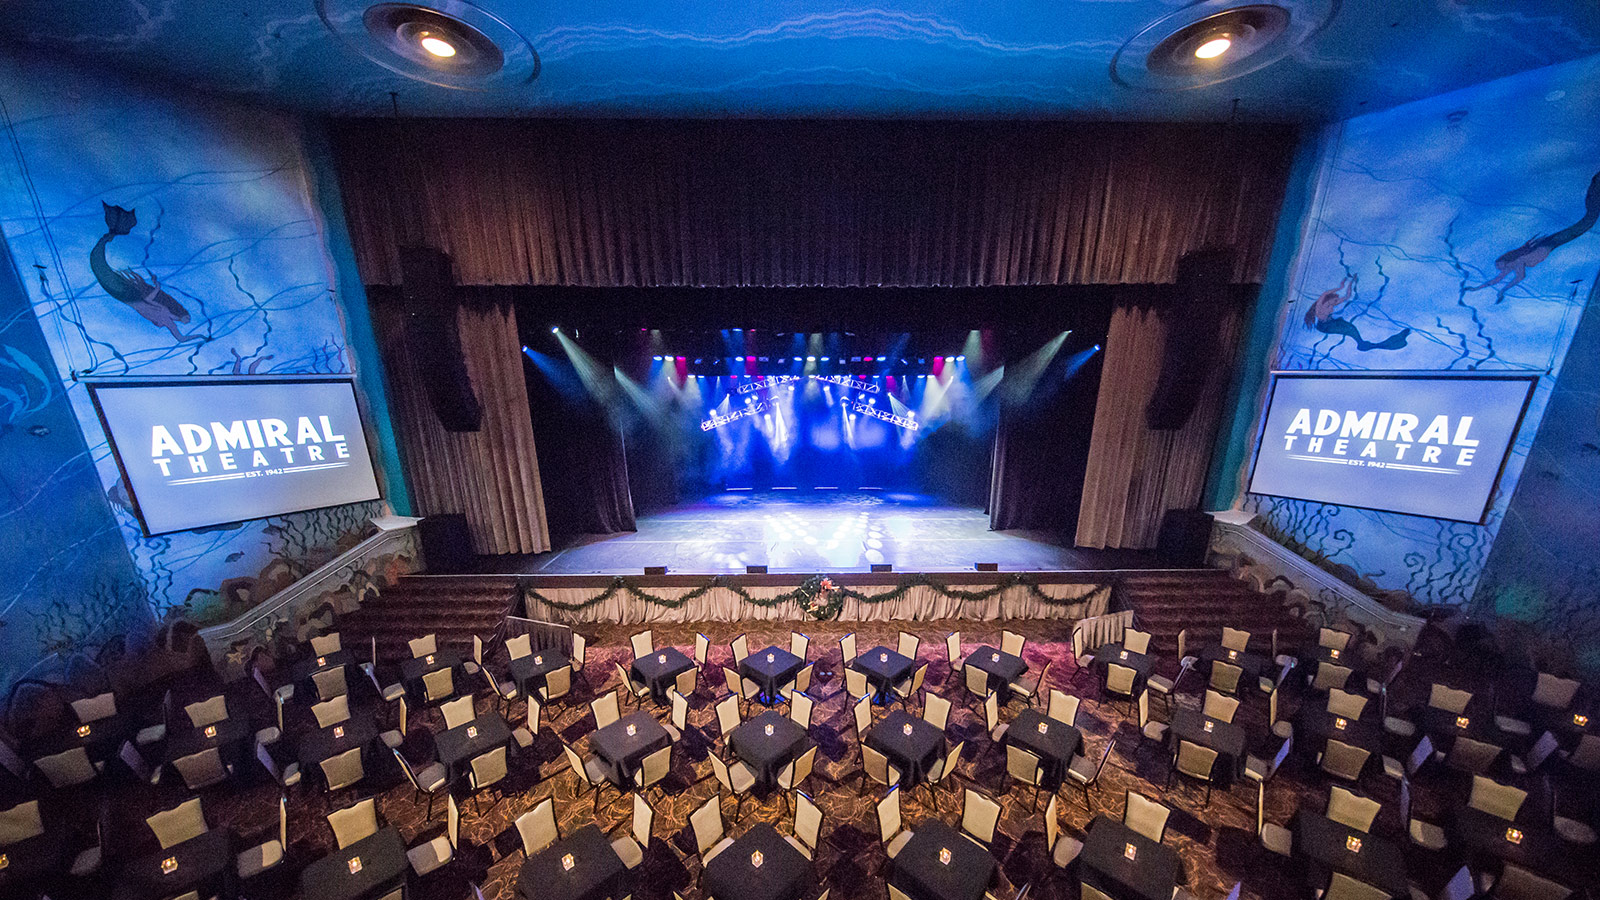 Admiral Theatre Cruises into the Future with Meyer Sound LEOPARD Main Reinforcement System